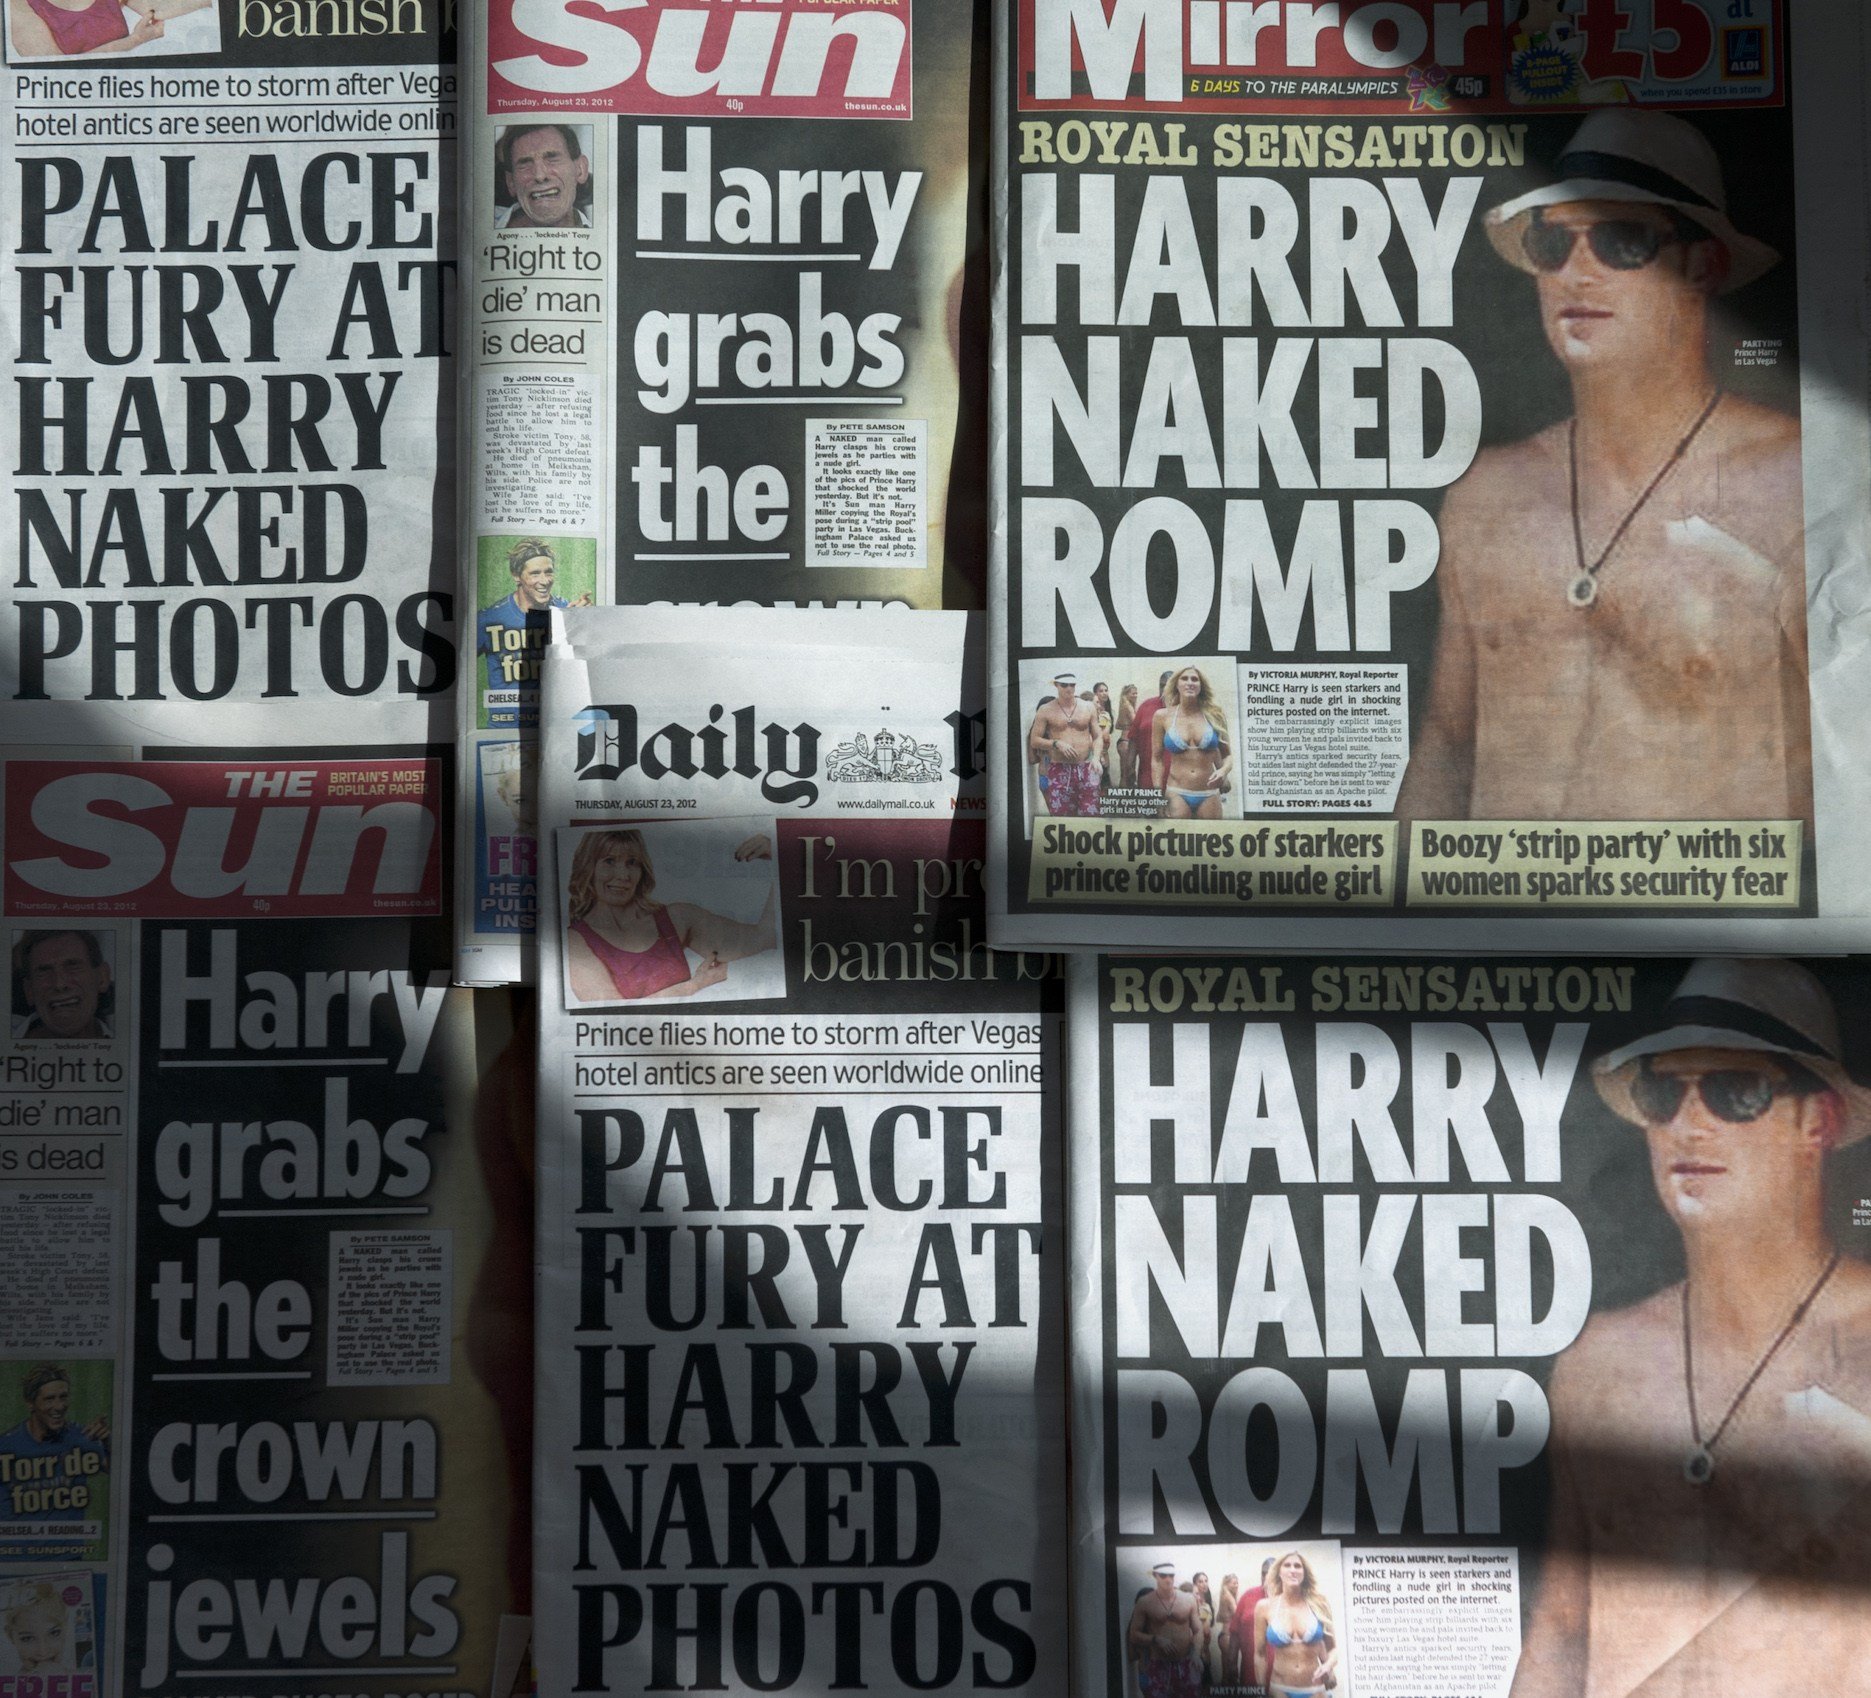 An arrangement of British daily newspapers photographed in London on August 23, 2012 shows the front-page headlines and stories regarding nude pictures of Britain's Prince Harry